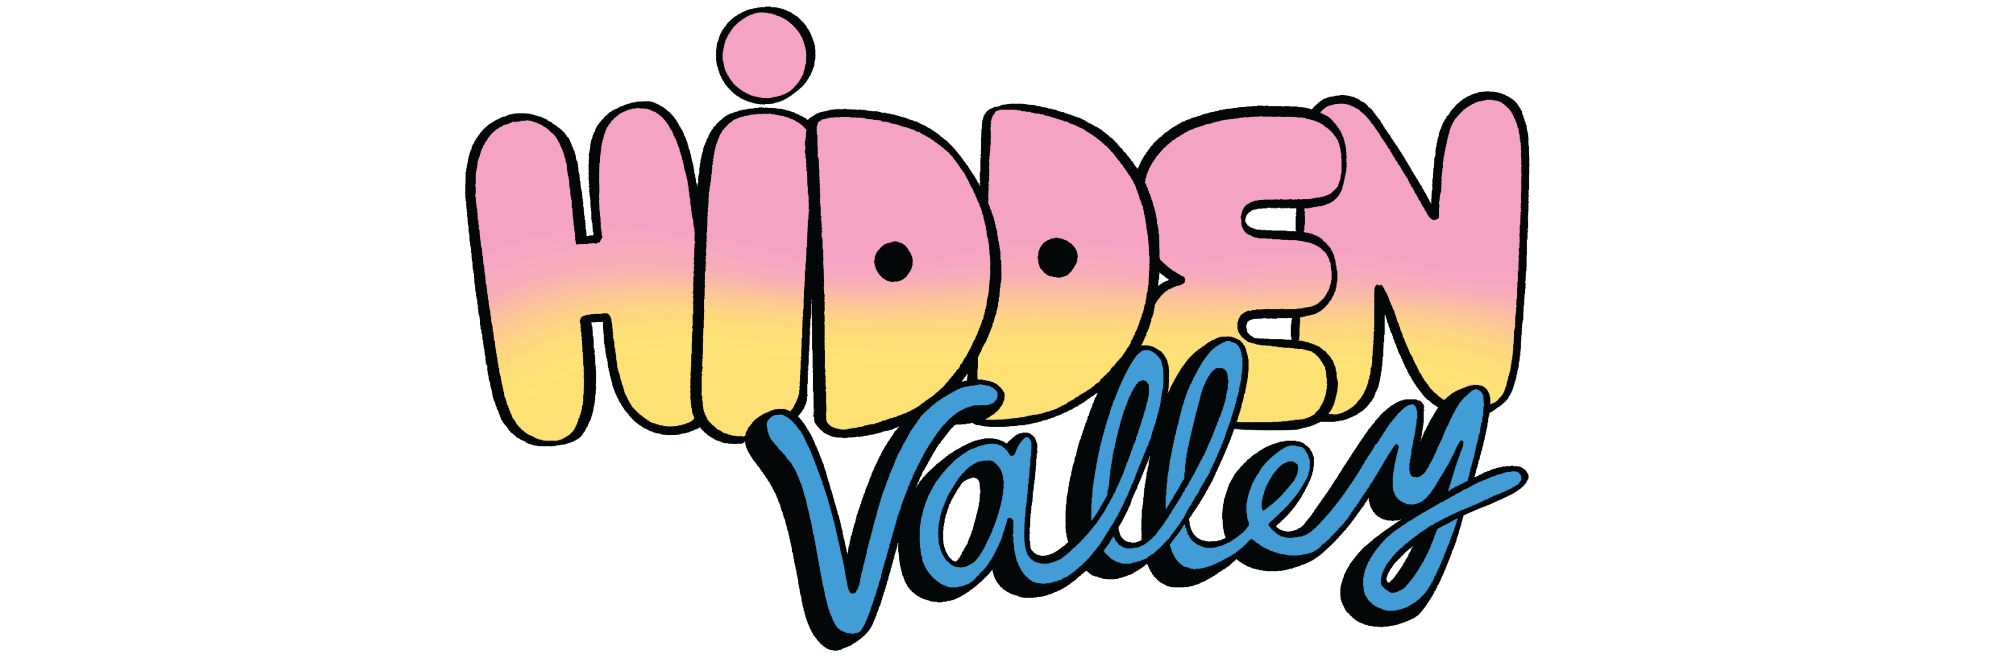 Colorful typography of Hidden Valley